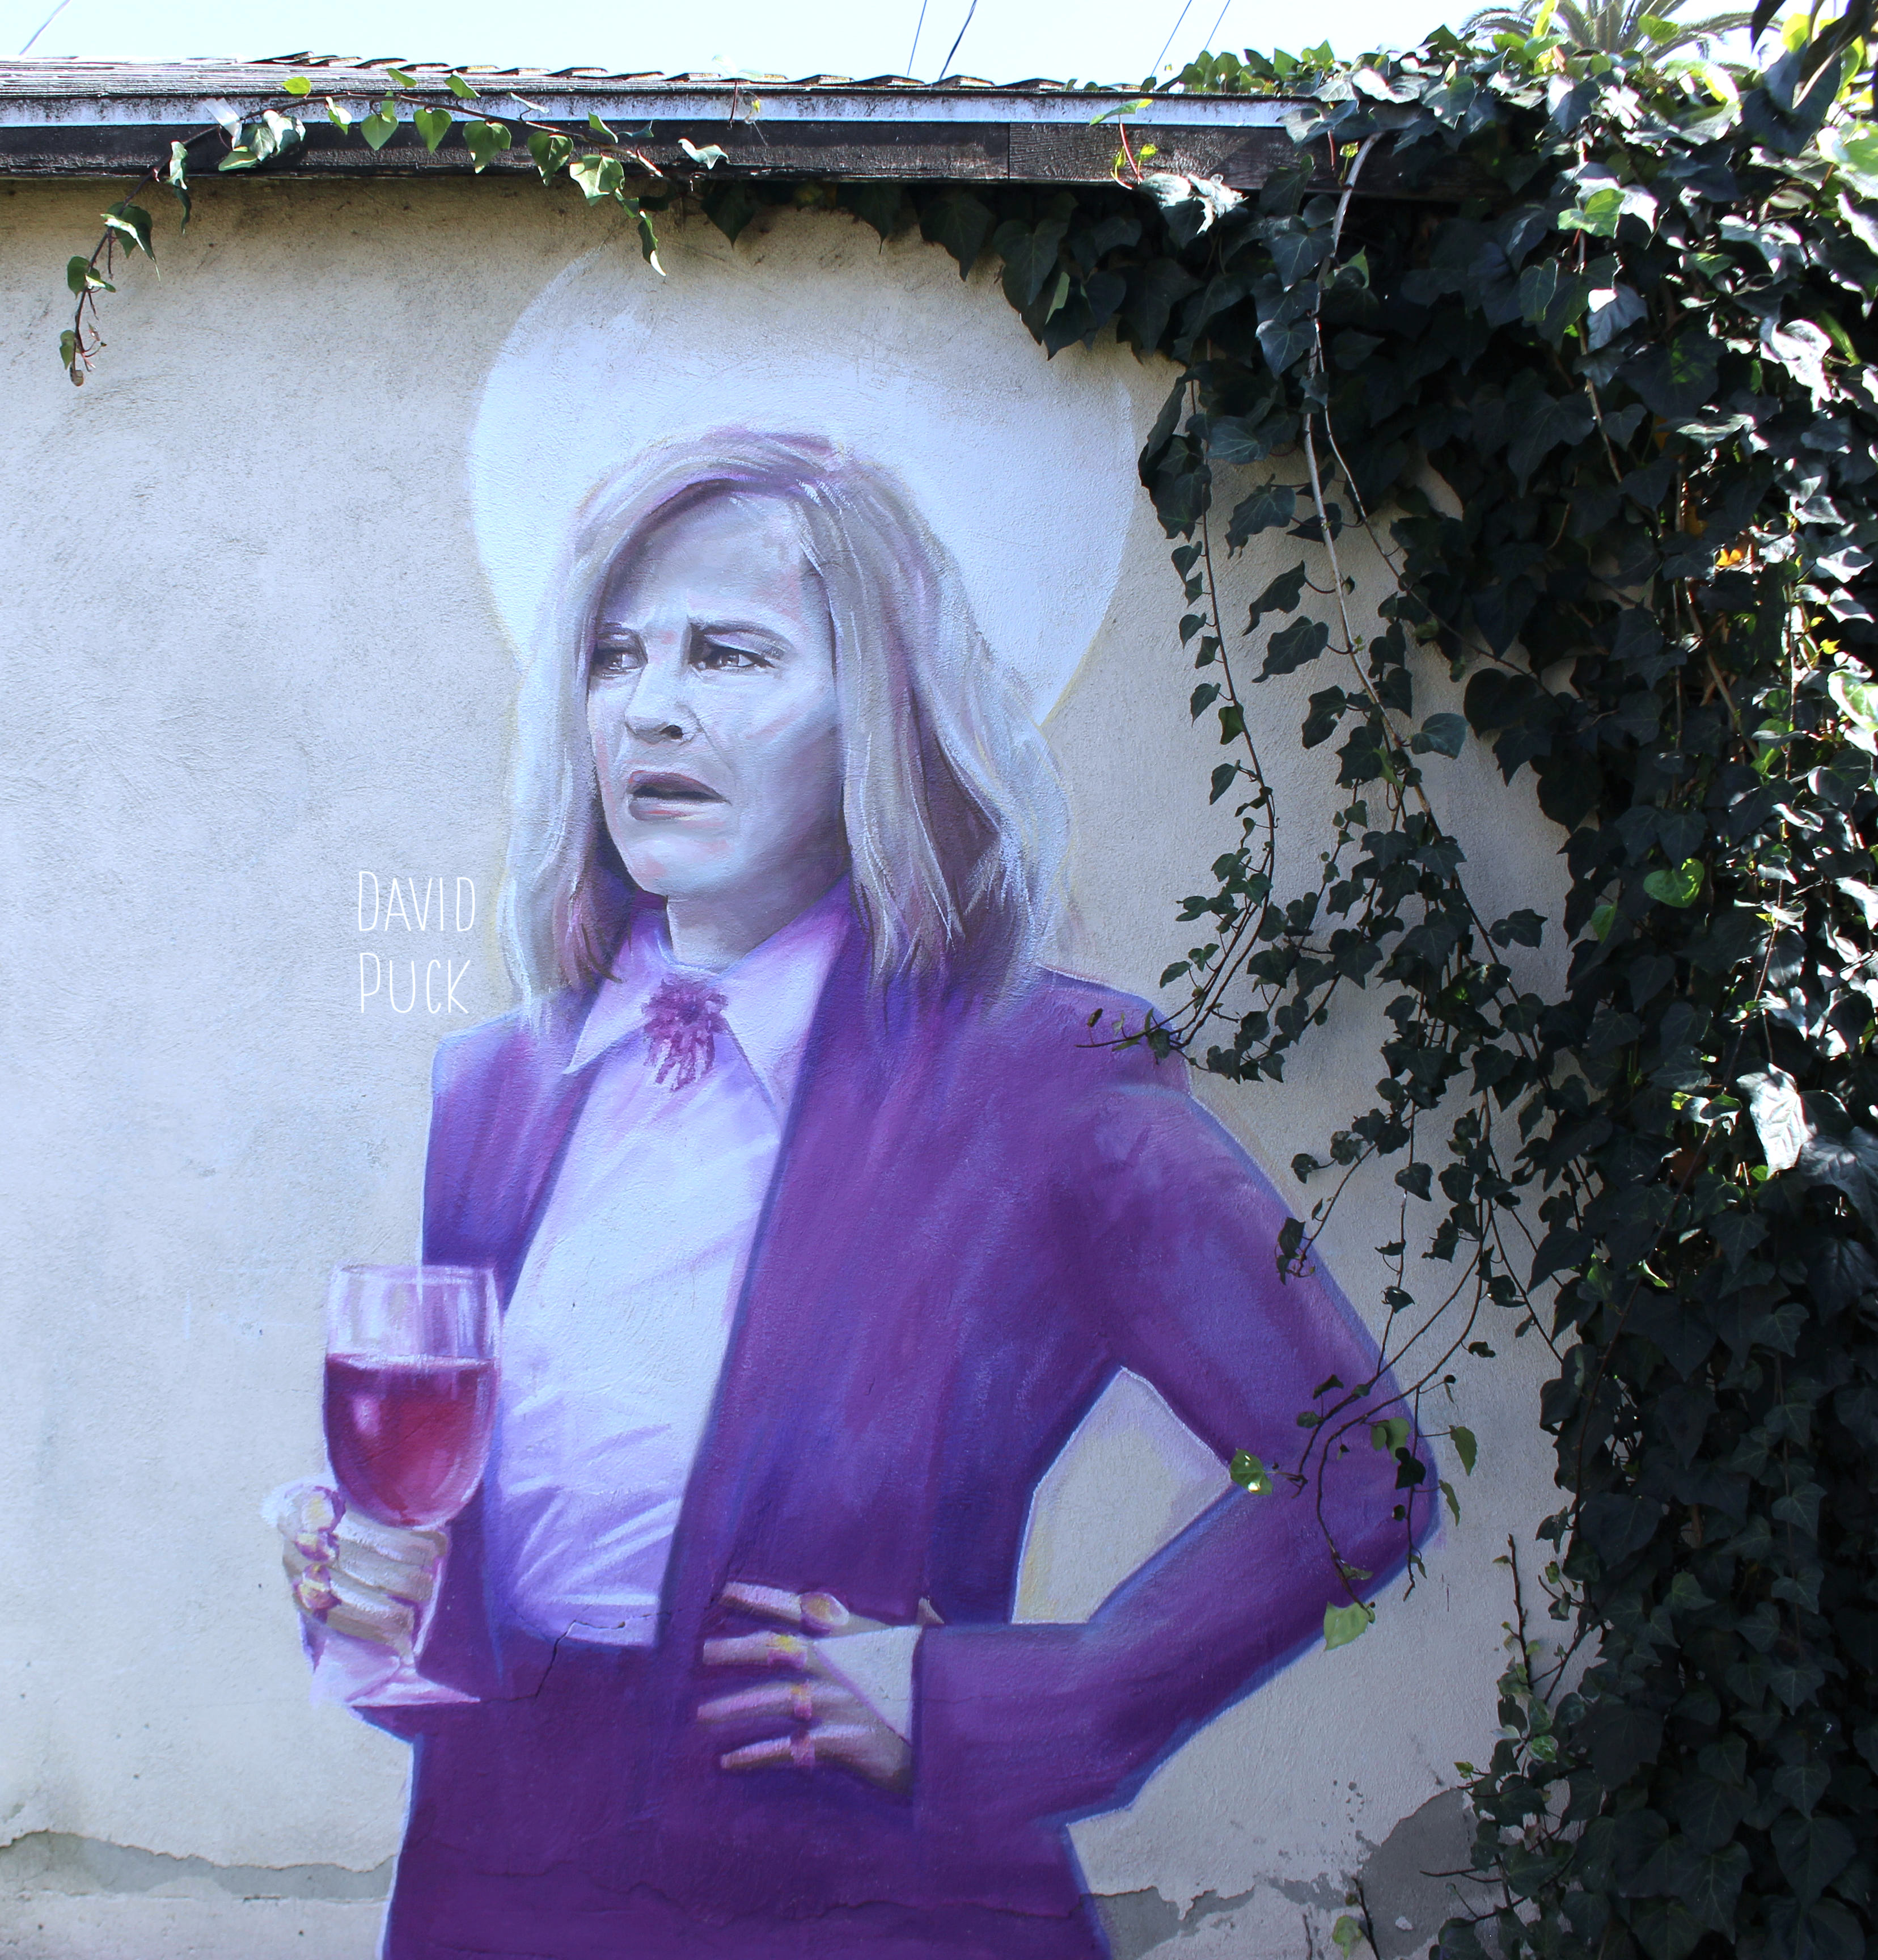 queer Street art mural of Catherine O'Hara from Schitts Creek Moira Rose, by David Puck, in Los Angeles California